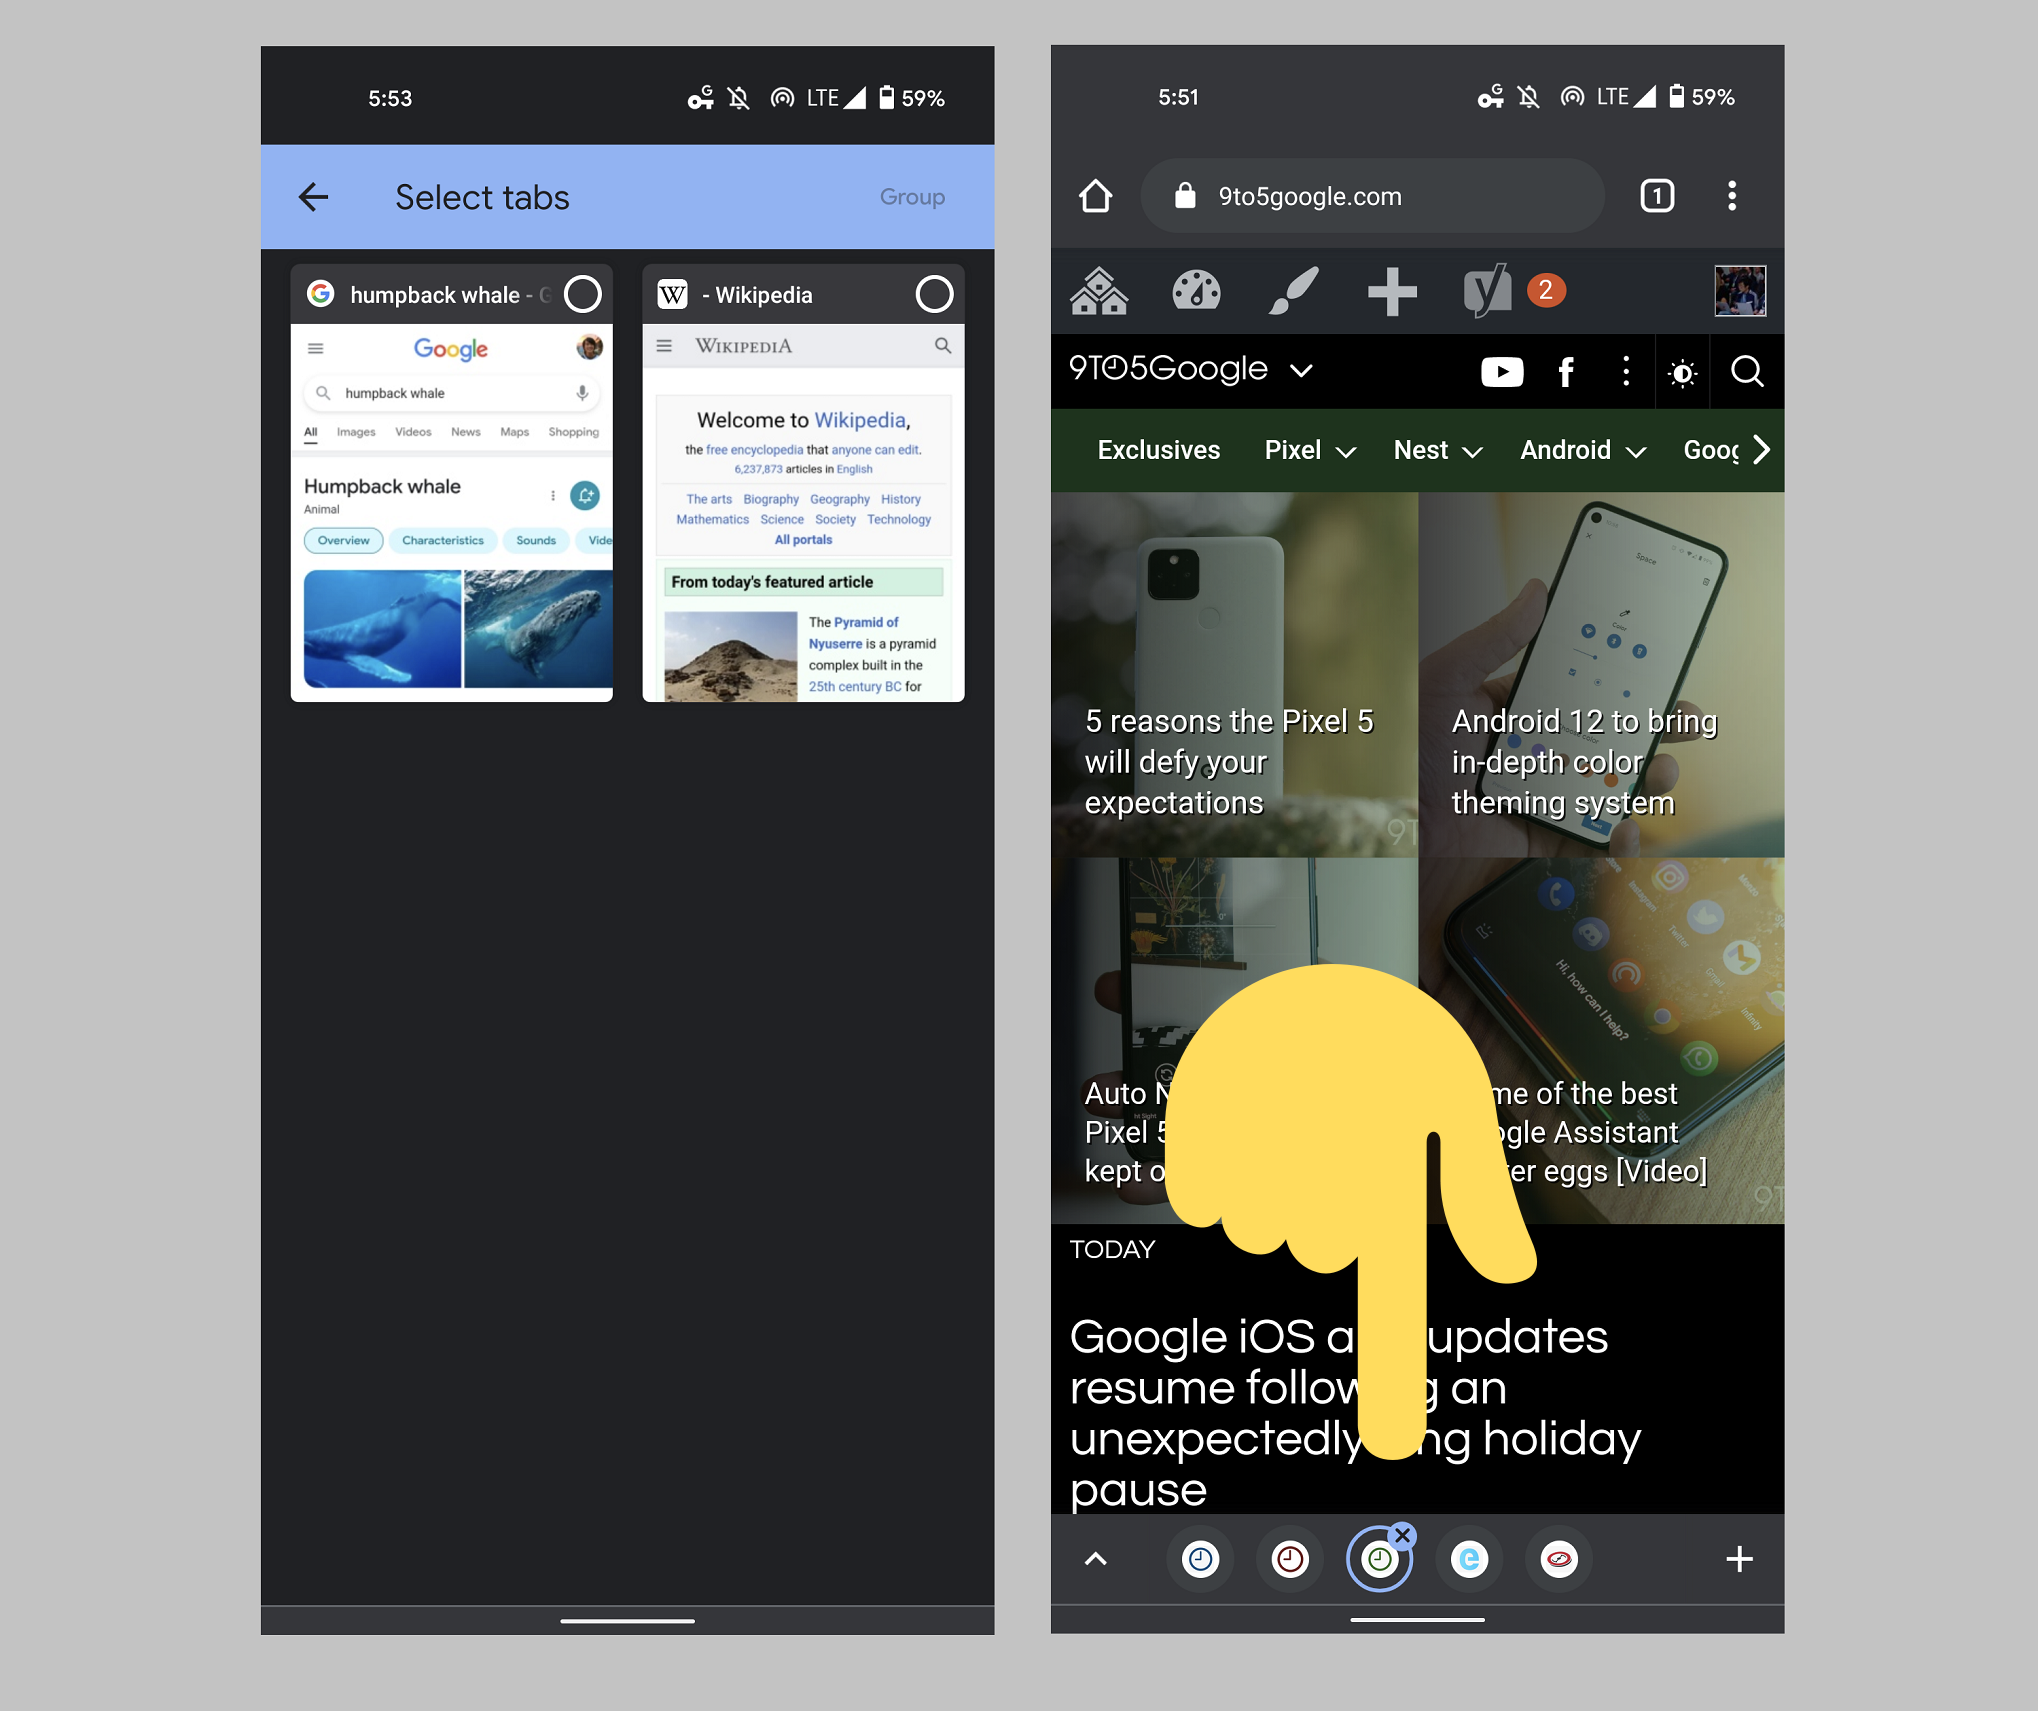 New Chrome Update on Android: Easy Tab Groups with a Single Click